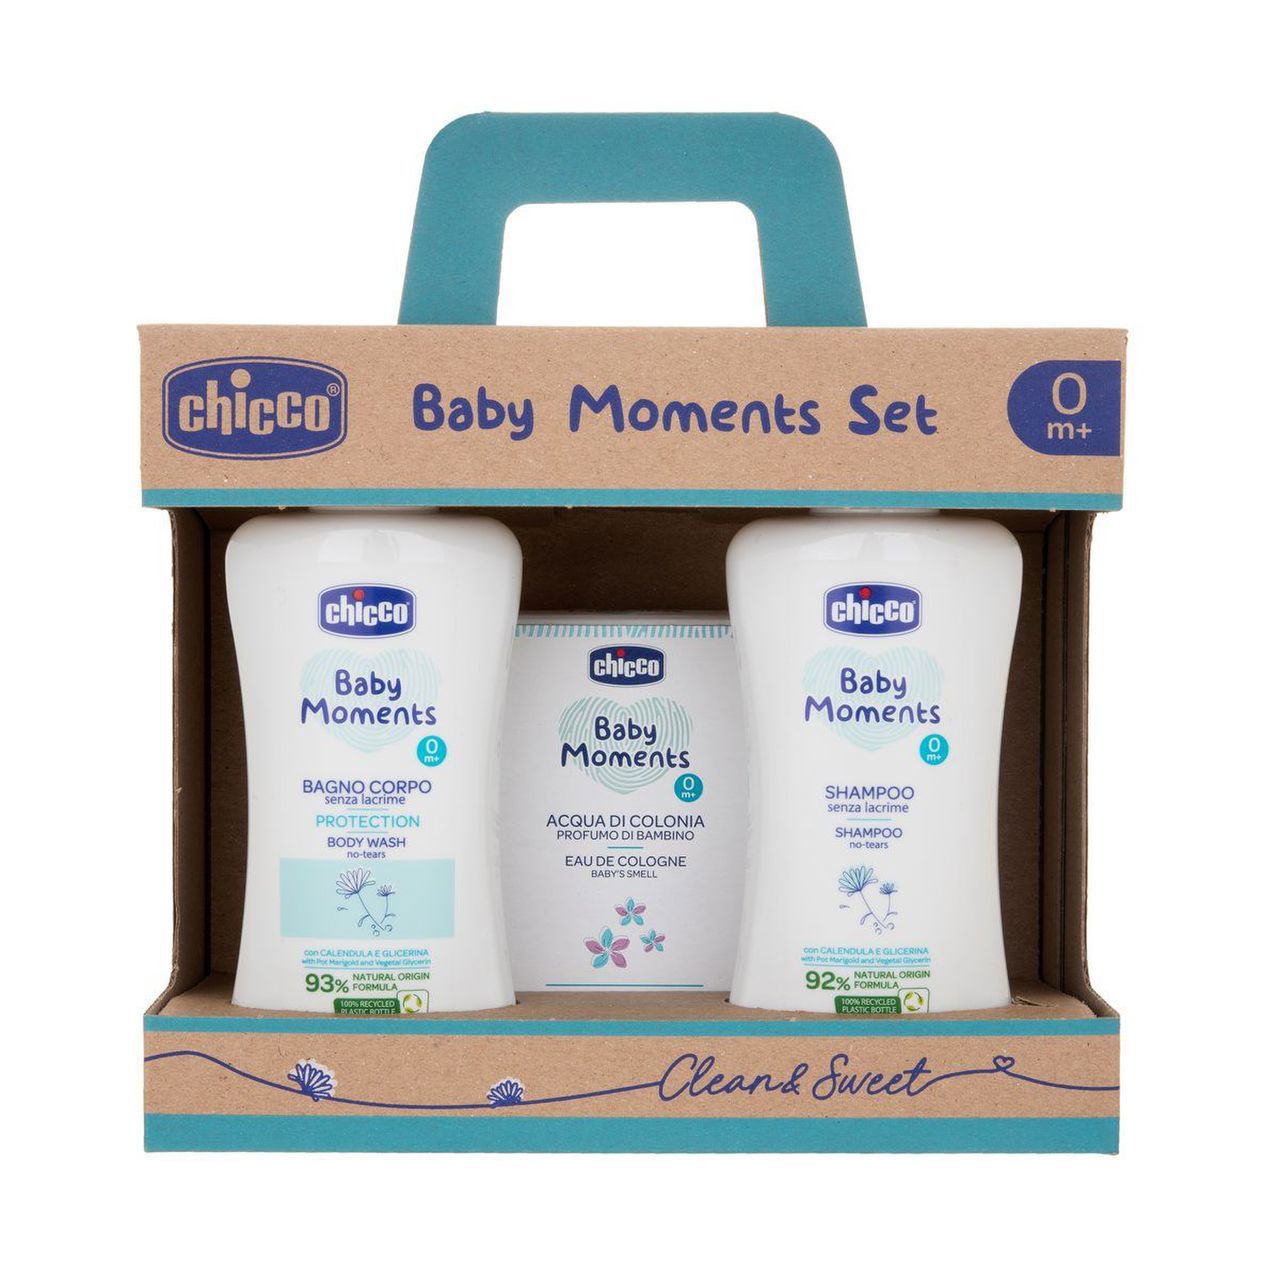 Baby Moments Set - clean & sweet